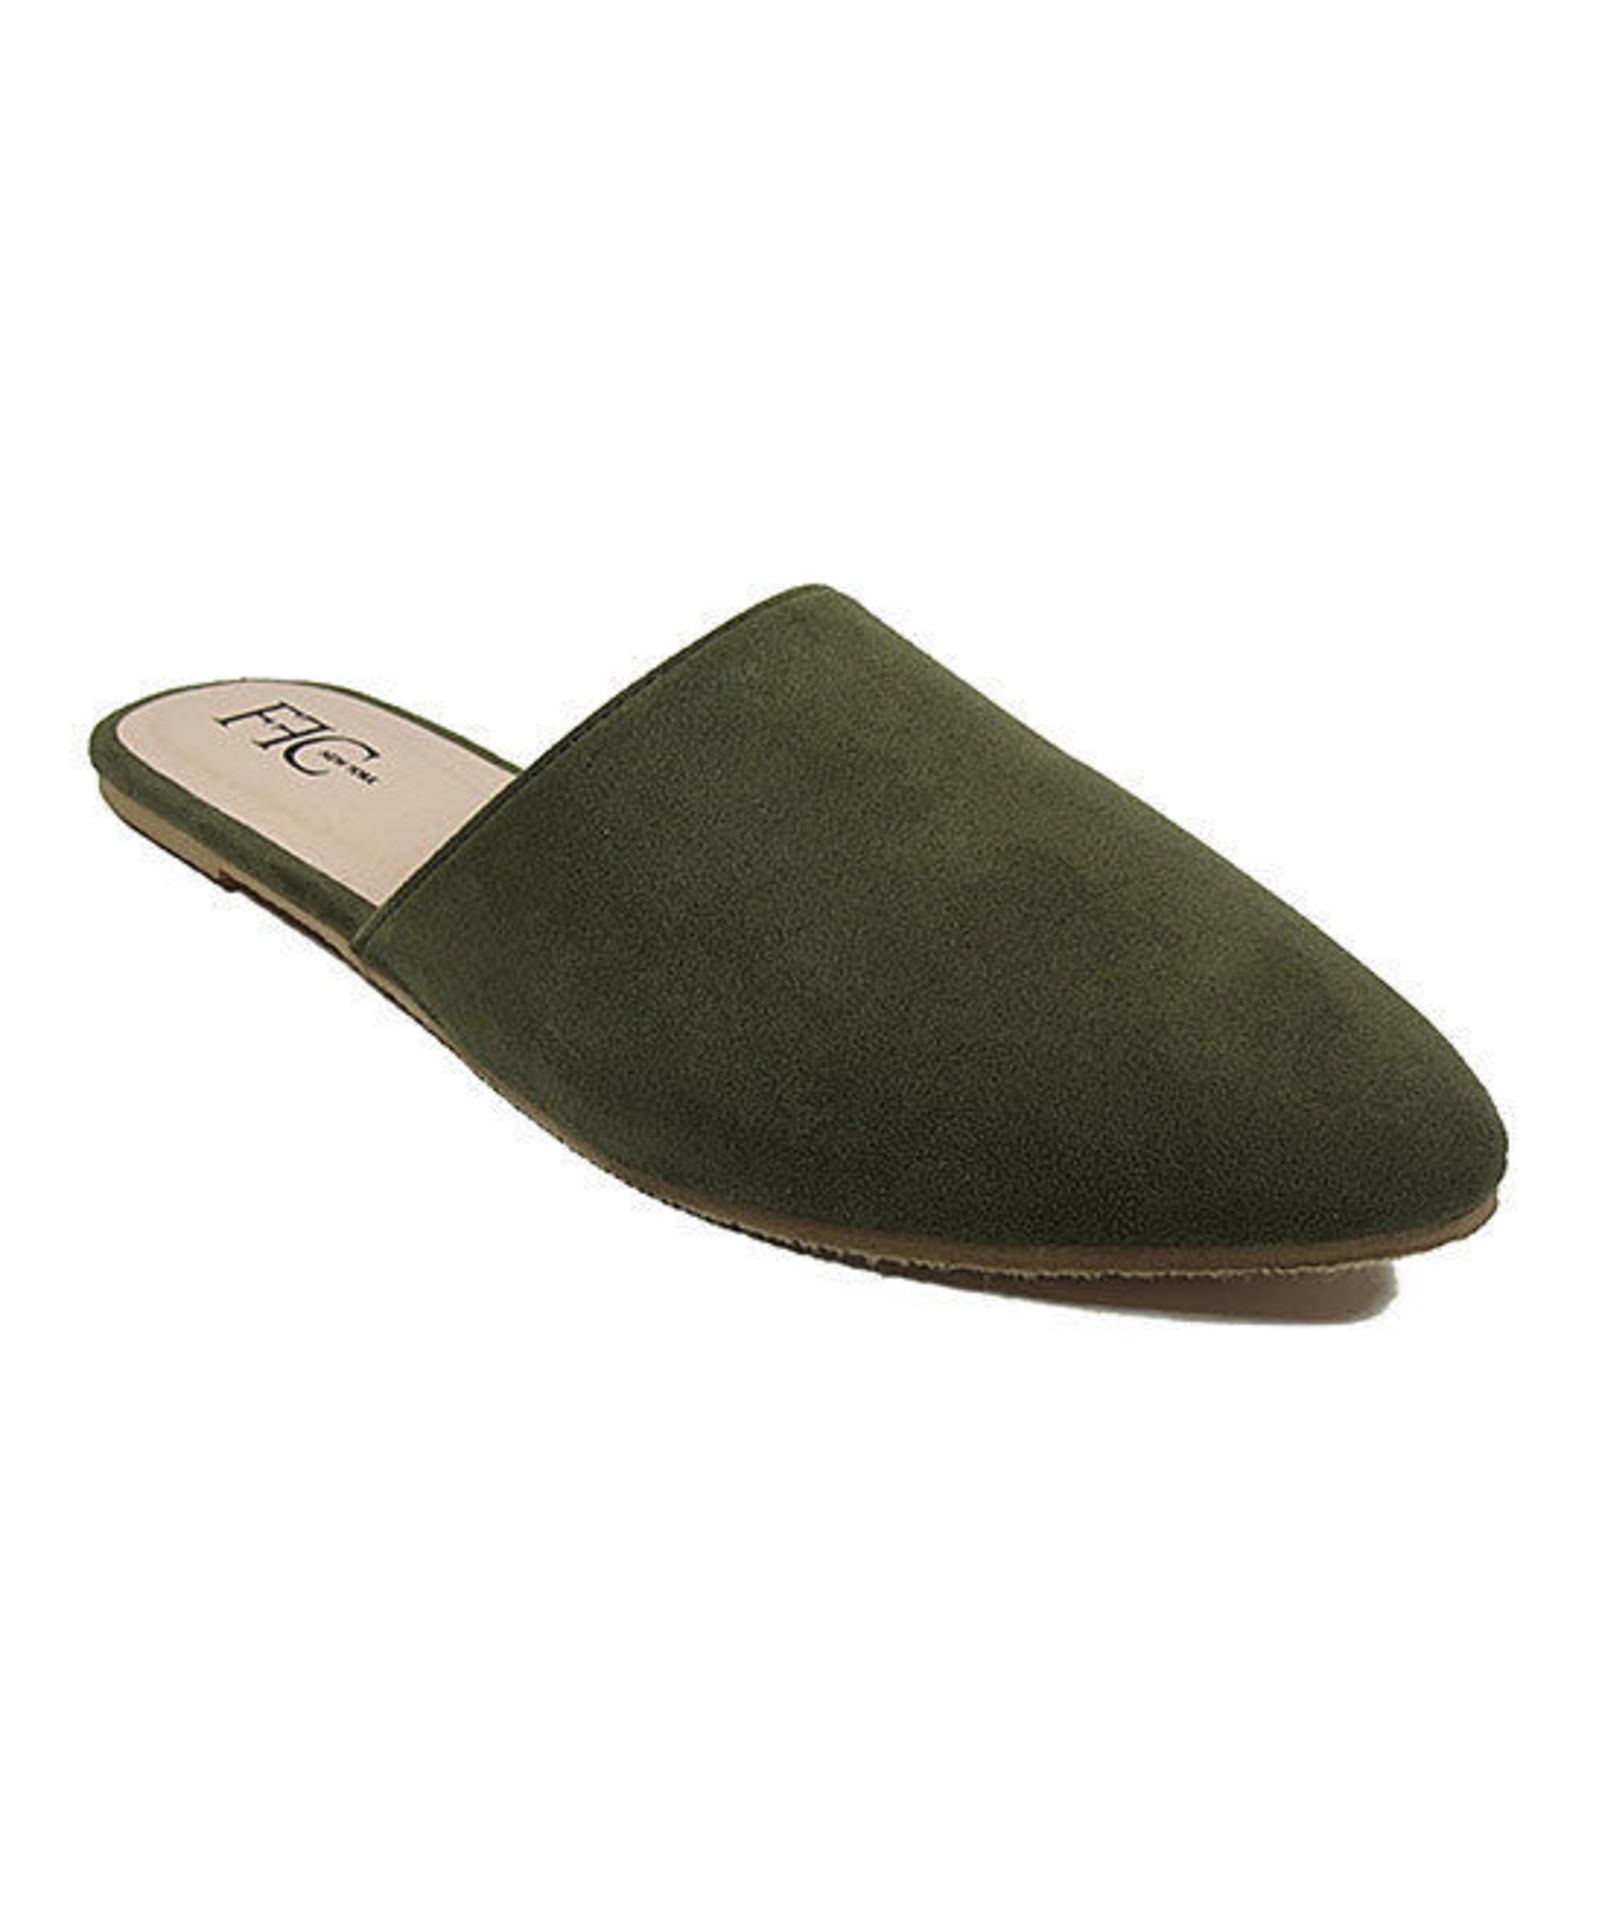 Ffc New York, Green Microsuede Sabrina Mule, Us Size 8/Eu 38 (New With Box) [Ref: 47048739- G-001]- - Image 2 of 3